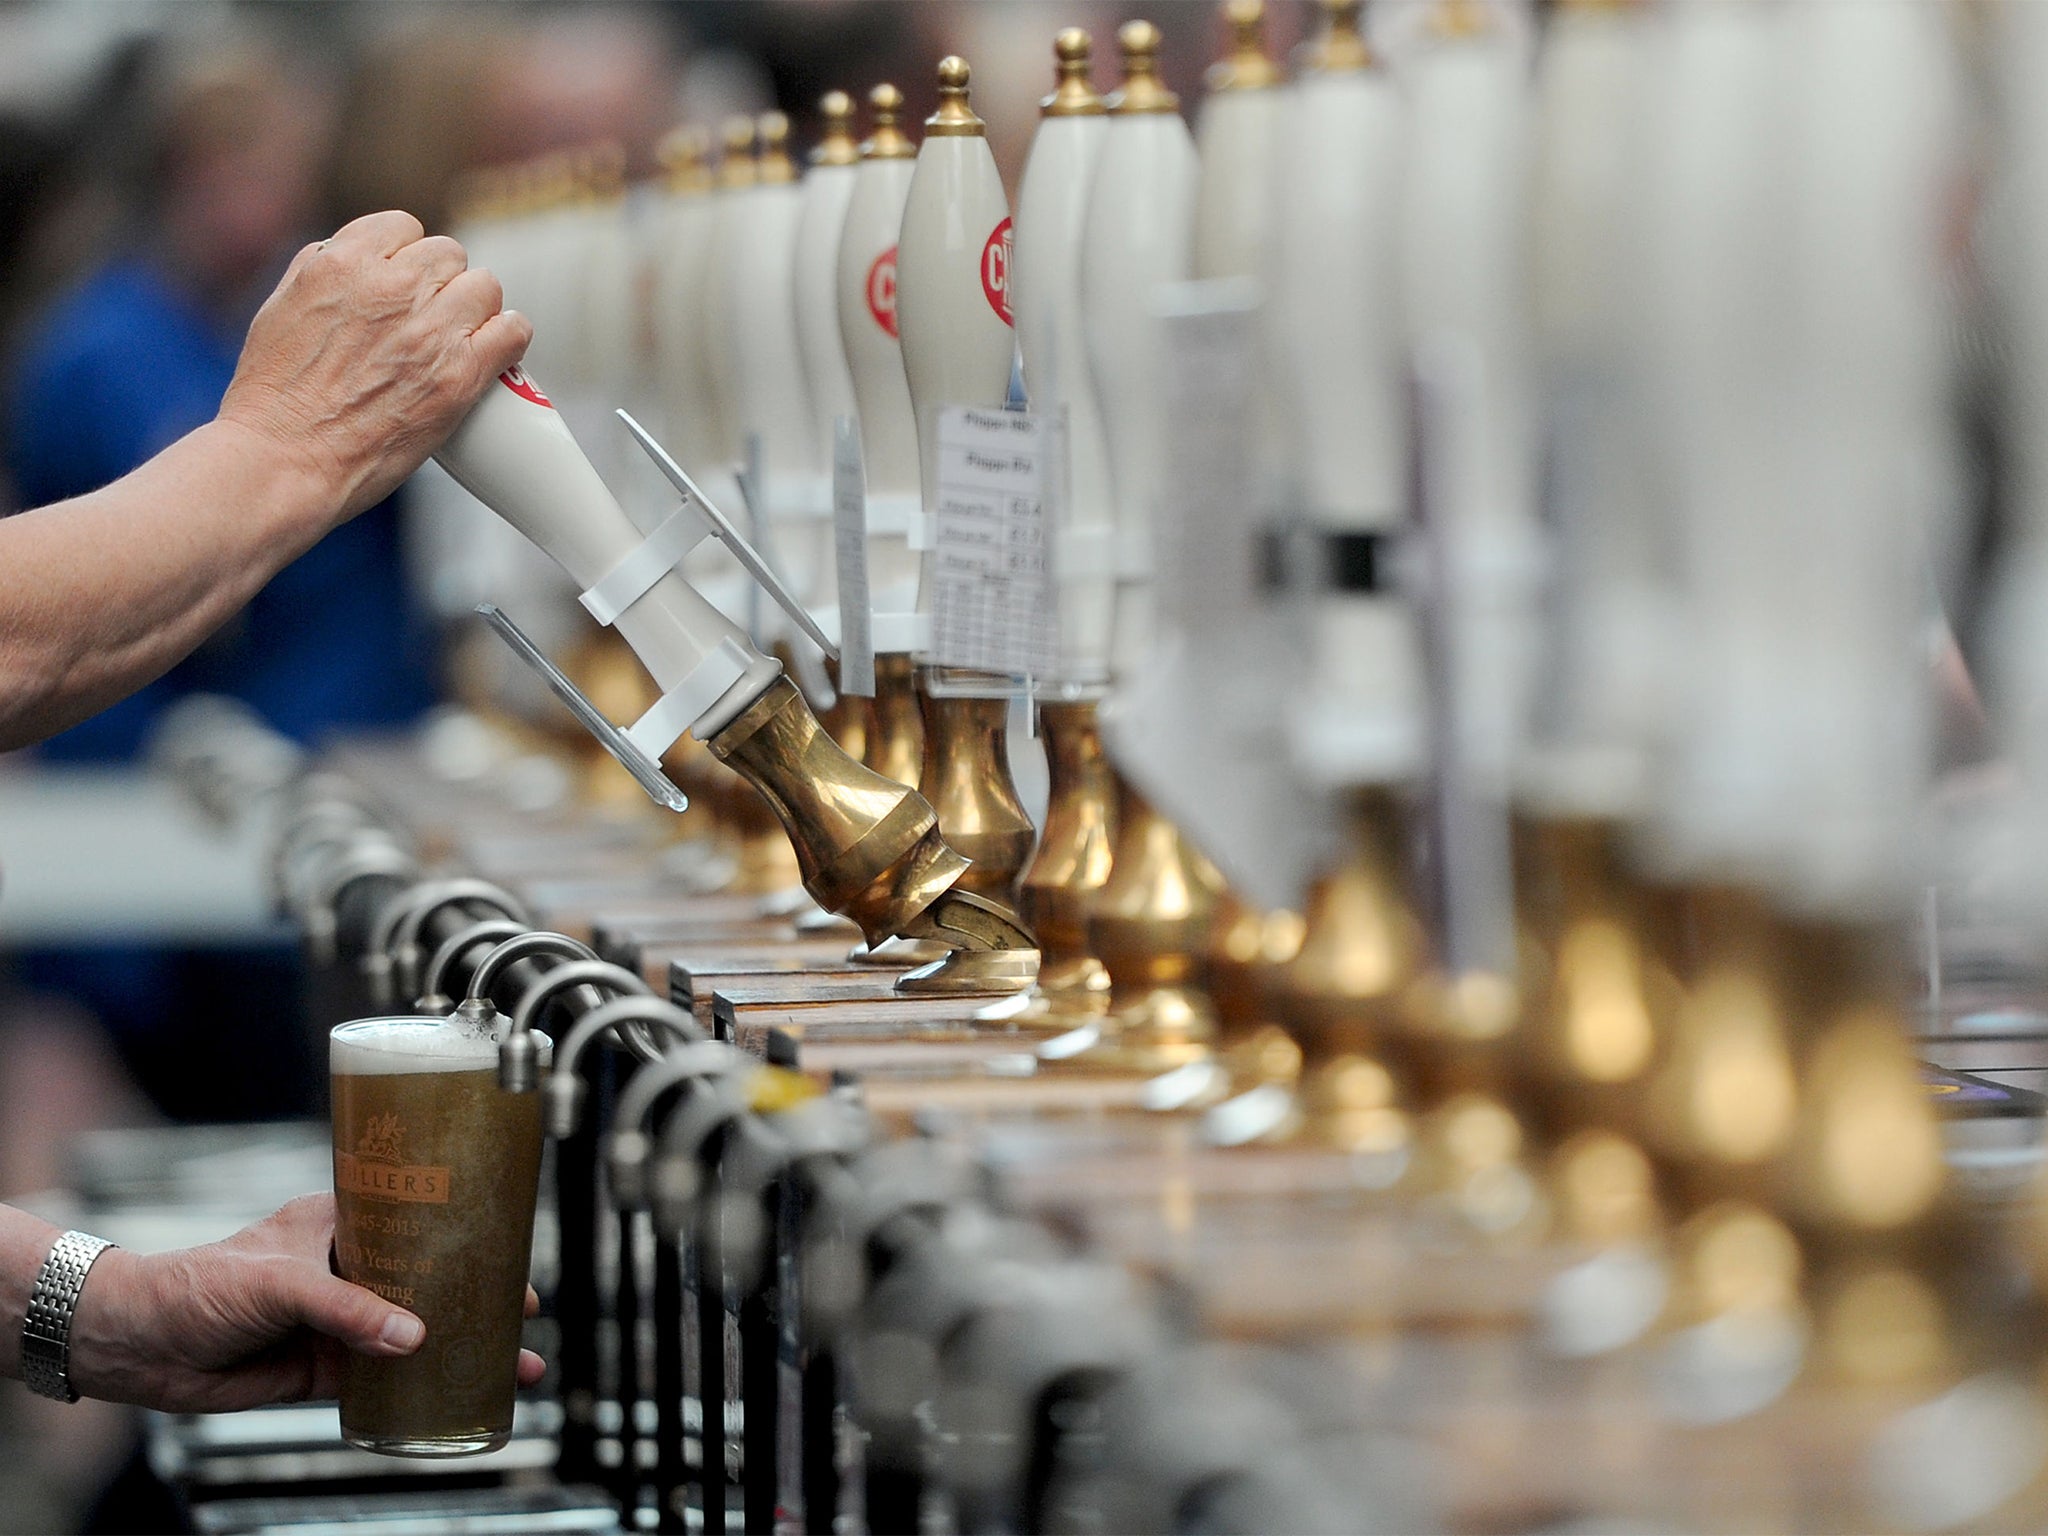 A drink is poured during the annual Great British Beer Festival organised by the Campaign for Real Ale (CAMRA) at Olympia in London